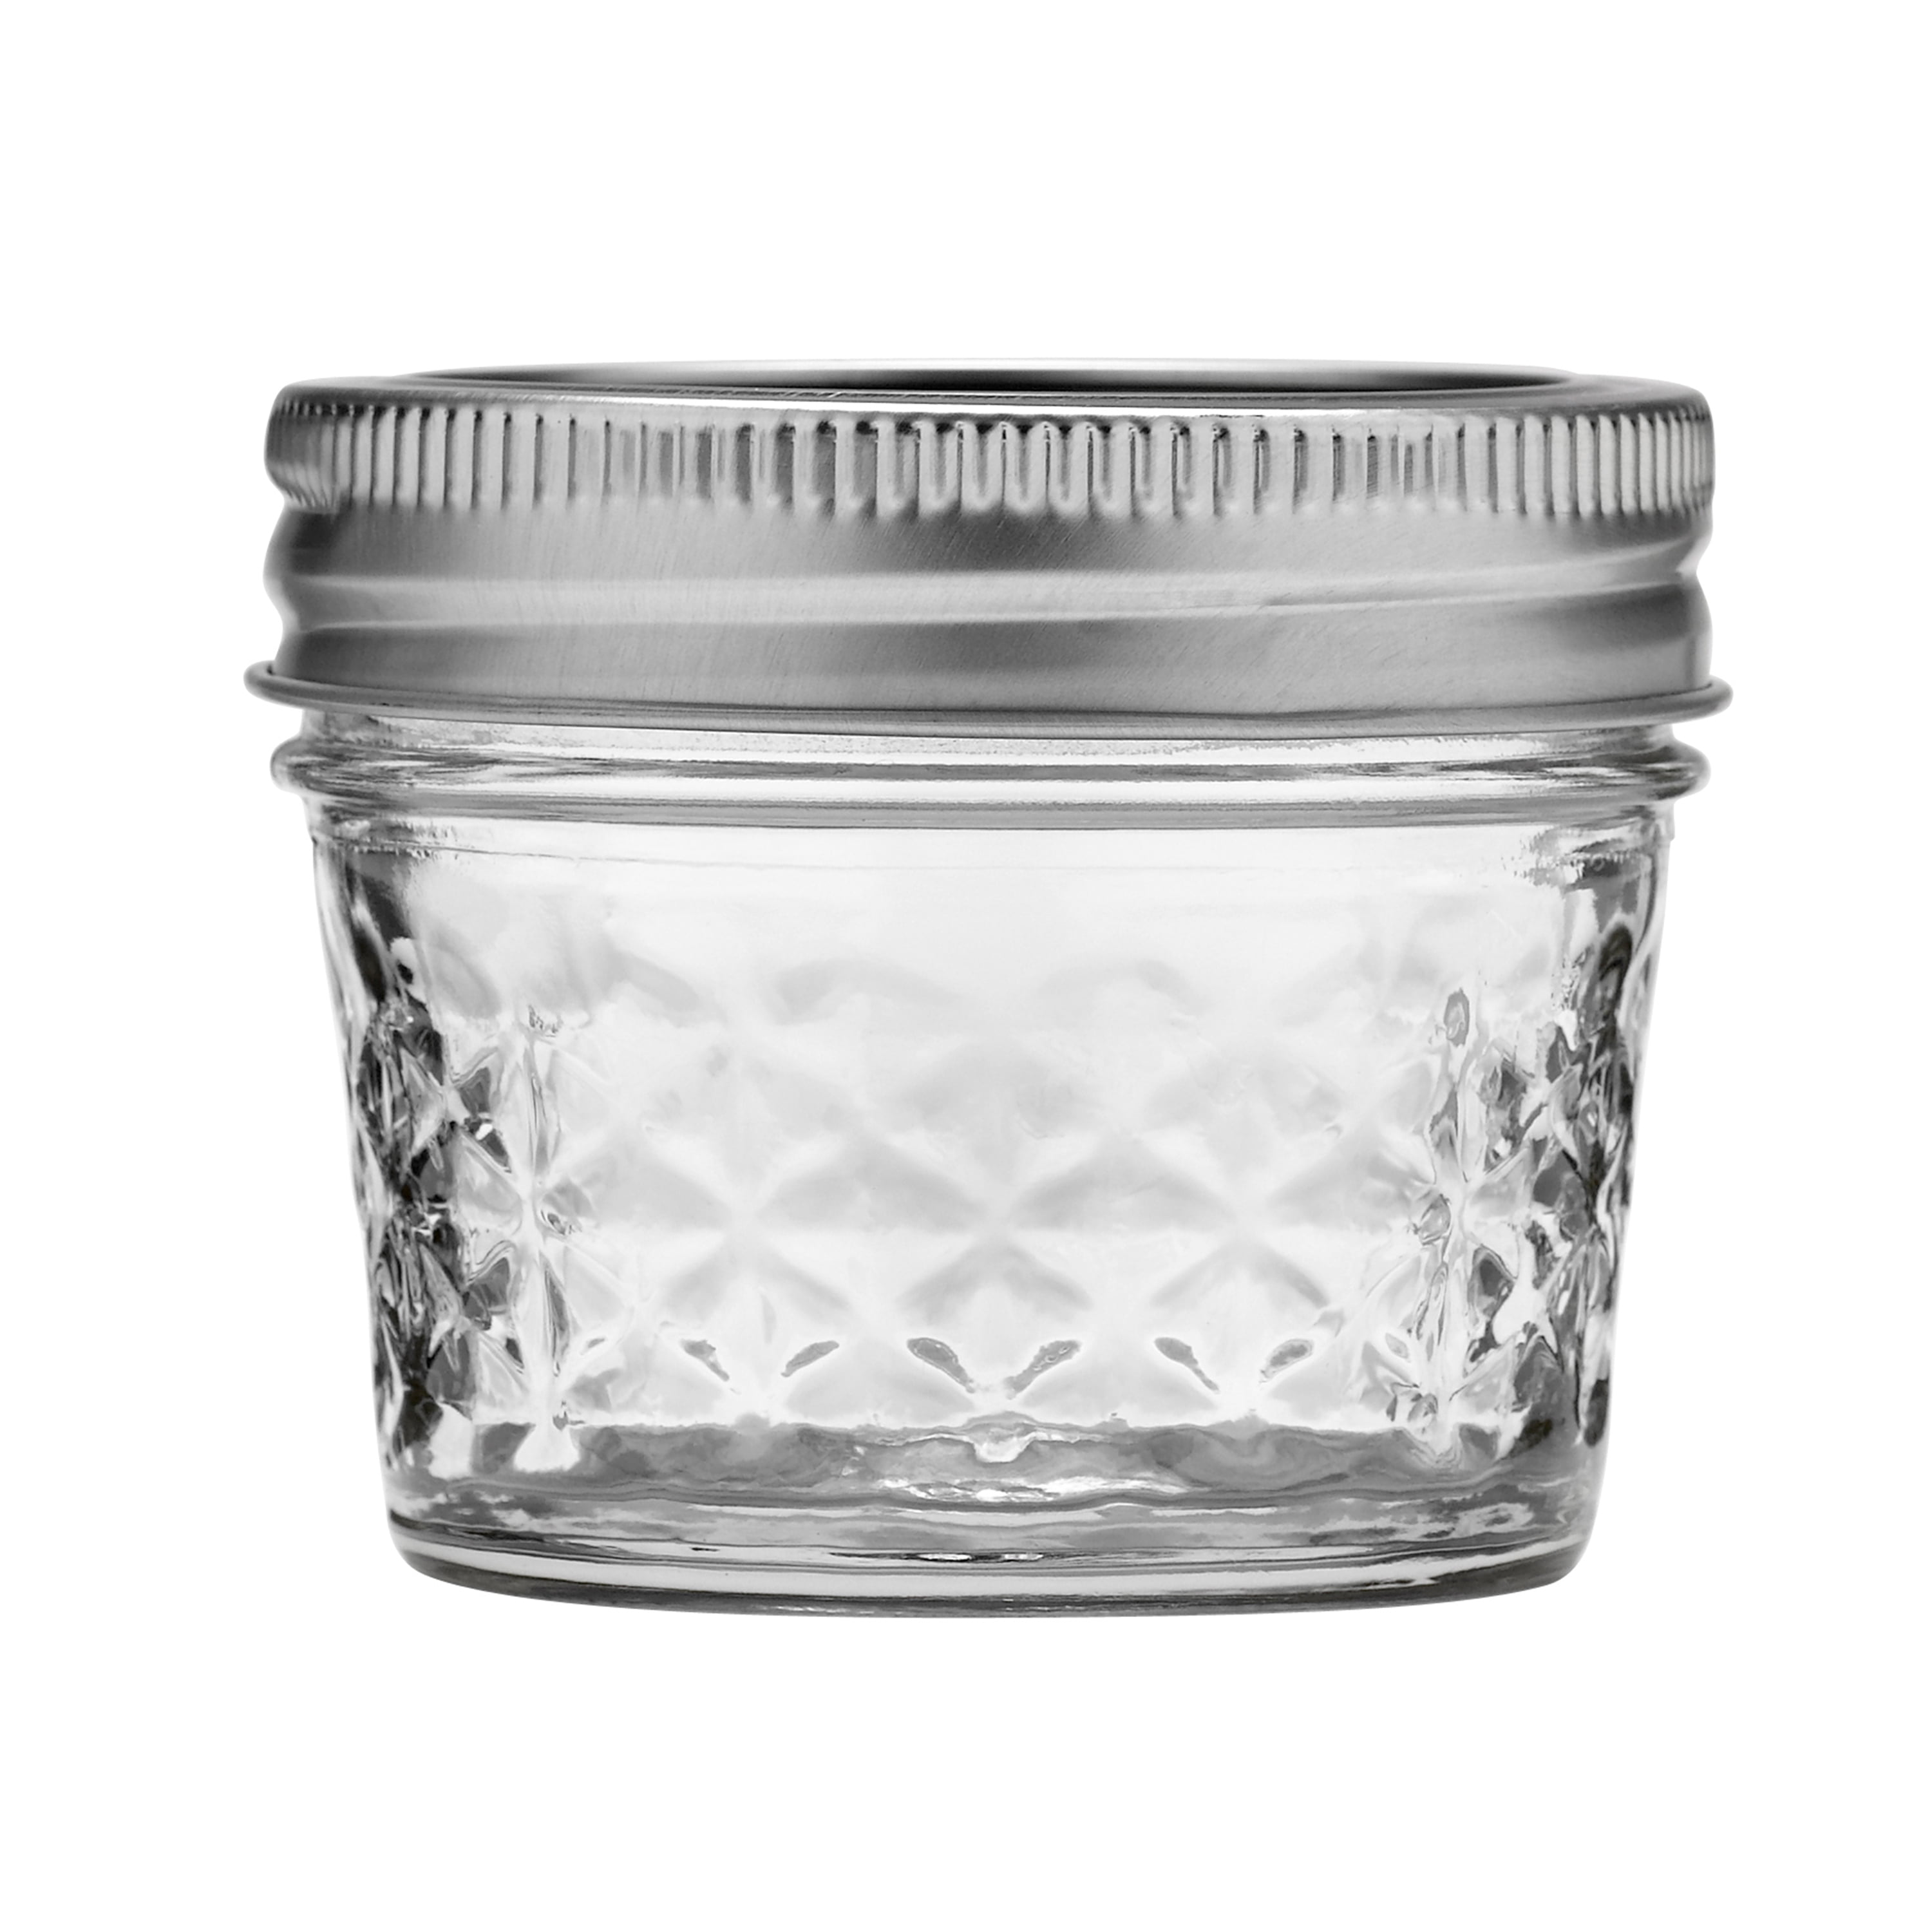 Set of 2 Regular Mouth Ball Mason Jar Quilted Crystal with Lids and Bands 8-Ounces 